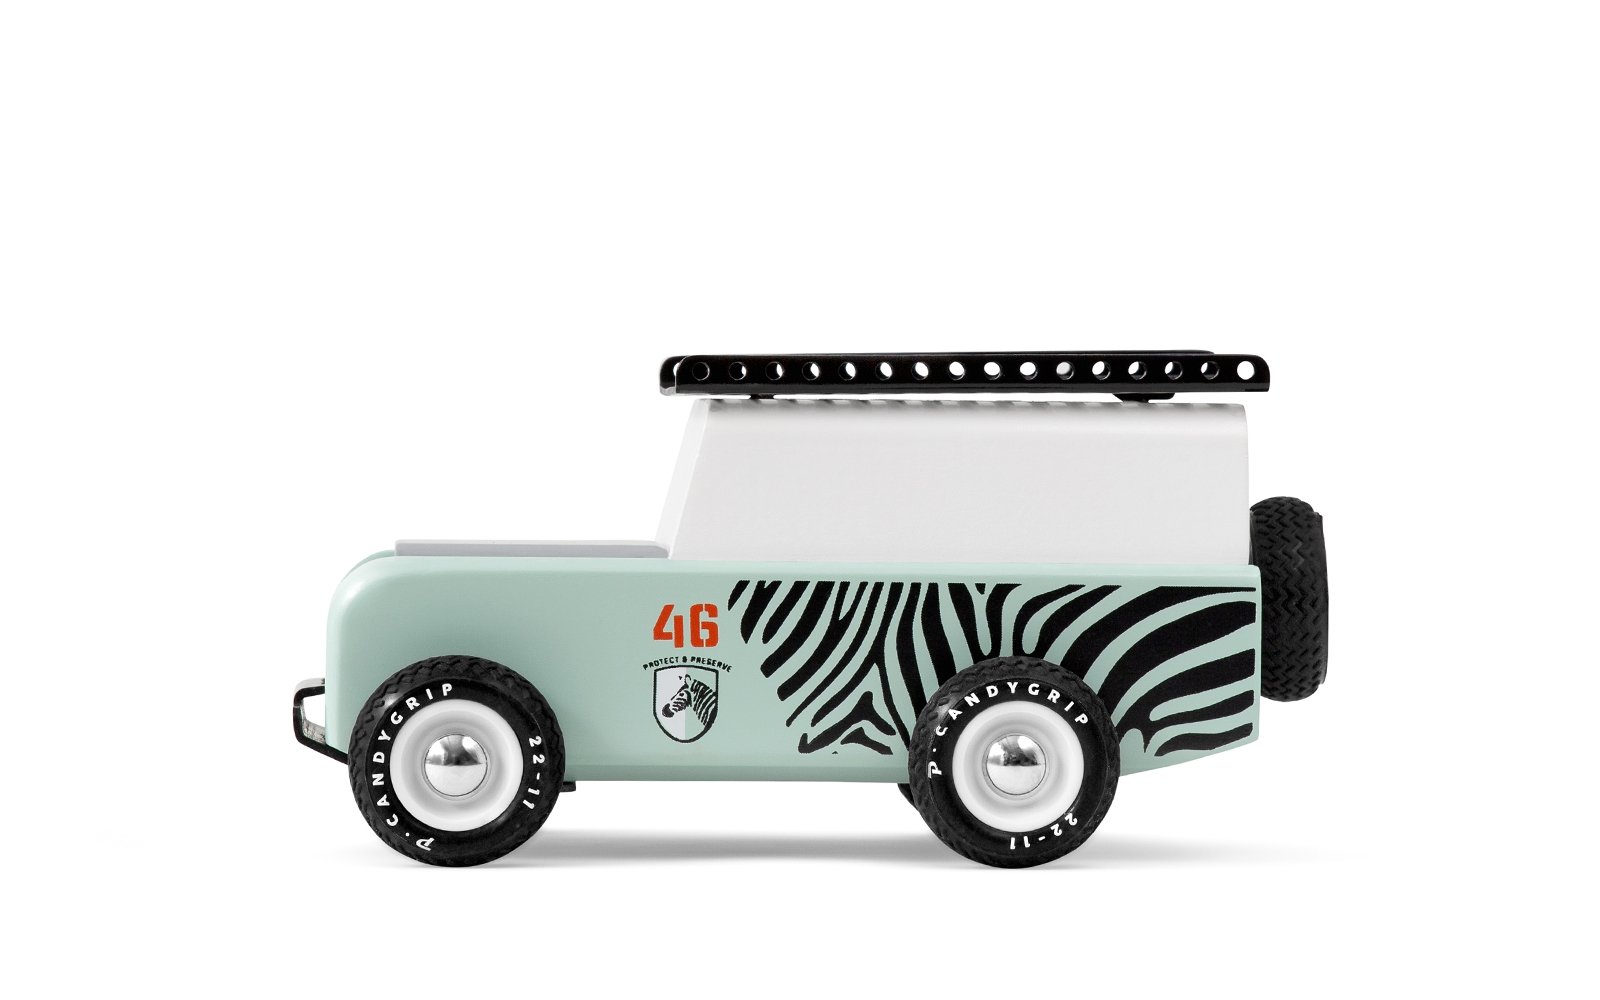 Candylab Toys Drifter Zebra- Modern Vintage Adventure Vehicle - Wood Wood Toys Canada's Favourite Montessori Toy Store